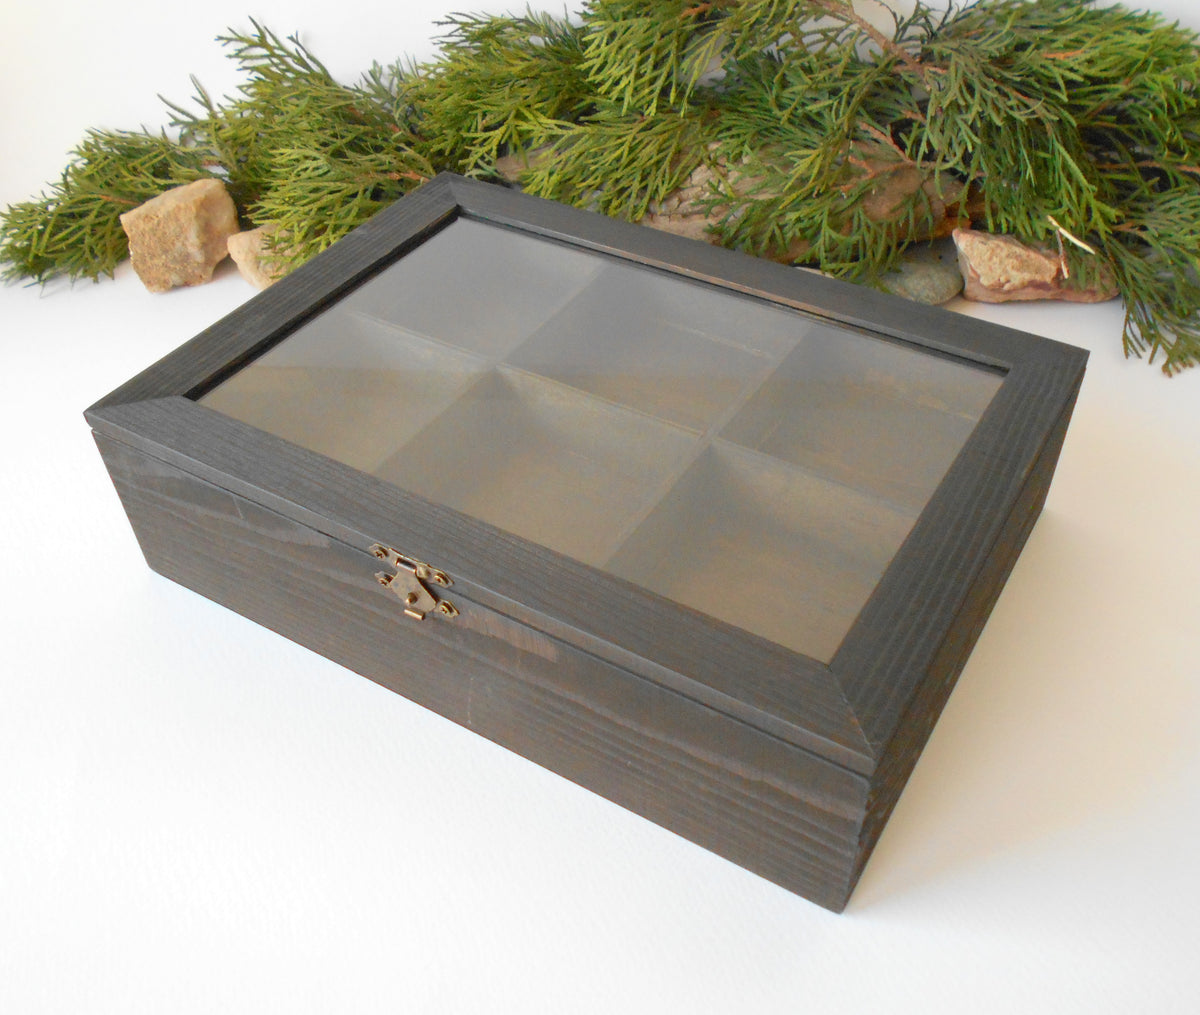 This is a wooden box with a glass display that is made of pinewood and that has metal hinges and closes with a bronze-color closing that may display various things like jewelry, miniatures, crystals, or other small objects of importance to you or your friends. &lt;span&gt;I have colored the box with mordant so that it looks like an old wood vintage box with a dark brown color.&lt;/span&gt;